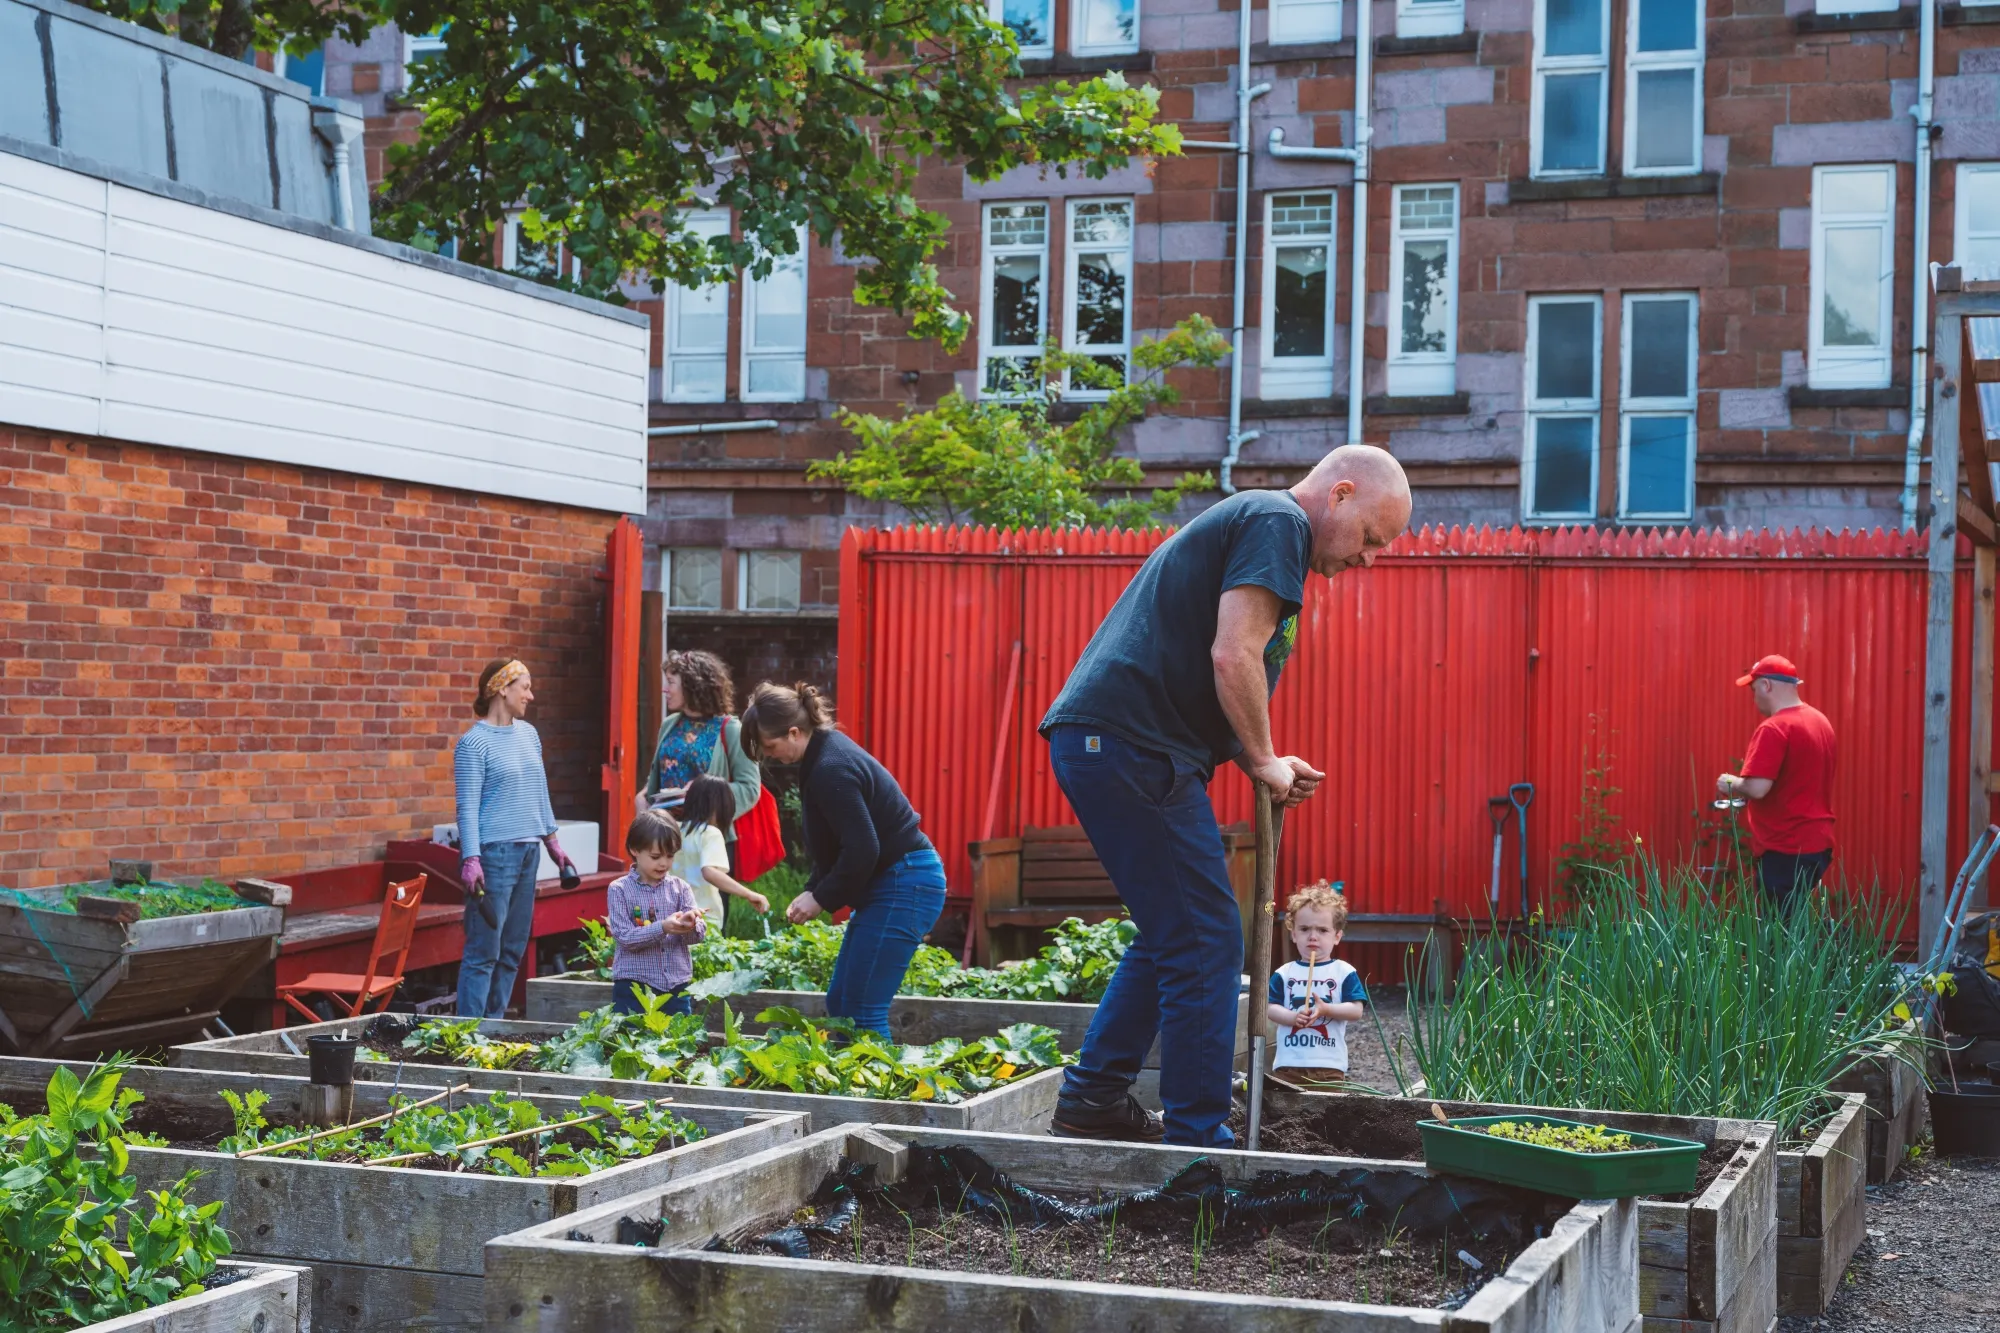 People digging in raised beds and planting things in a community garden.